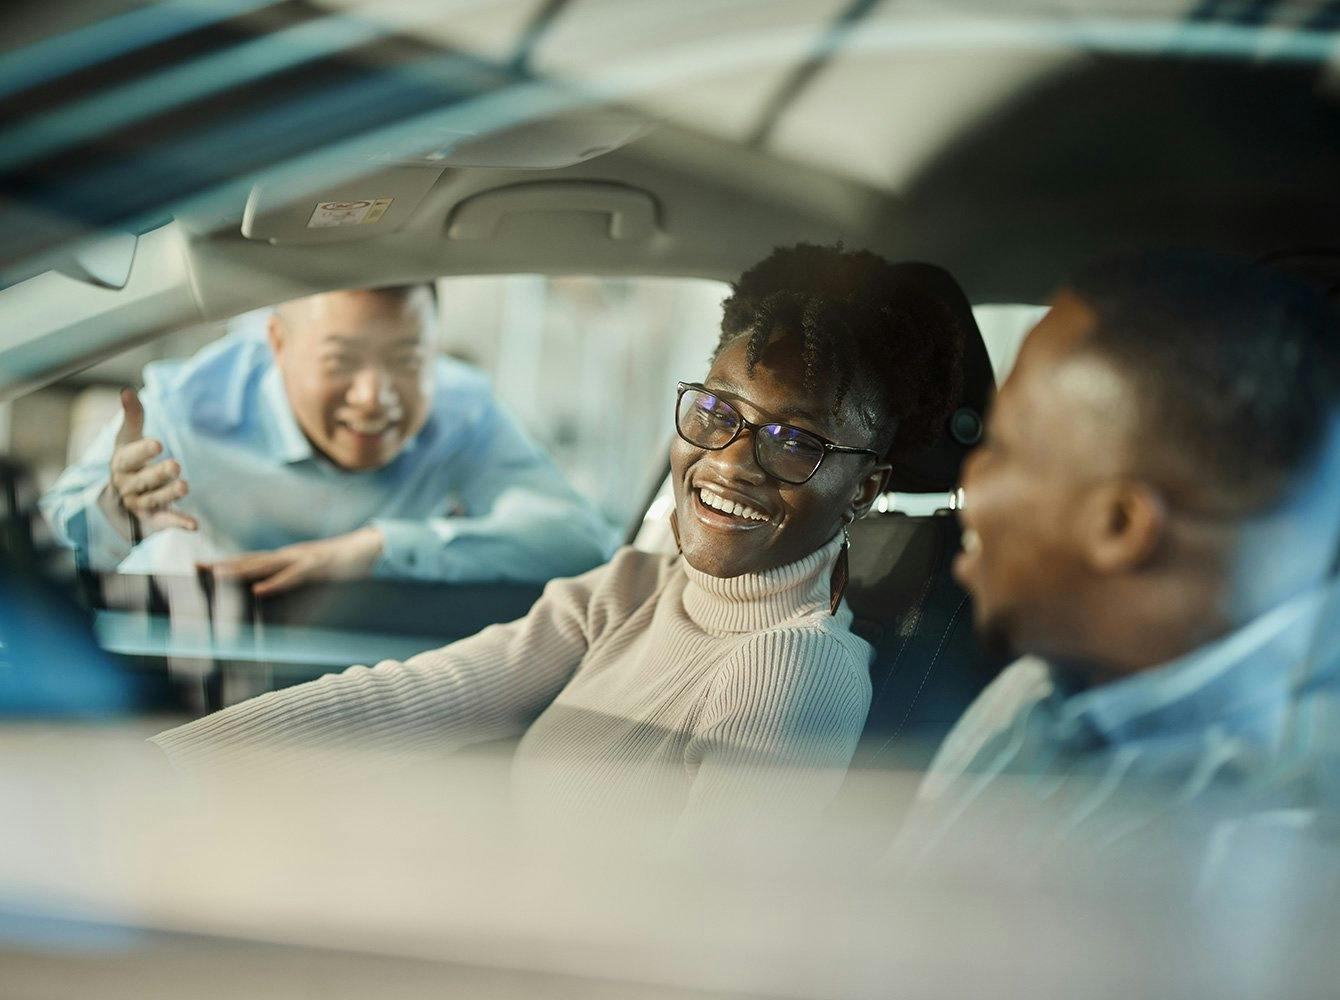 a smiling couple sitting in a car with a salesman talking to them at the window